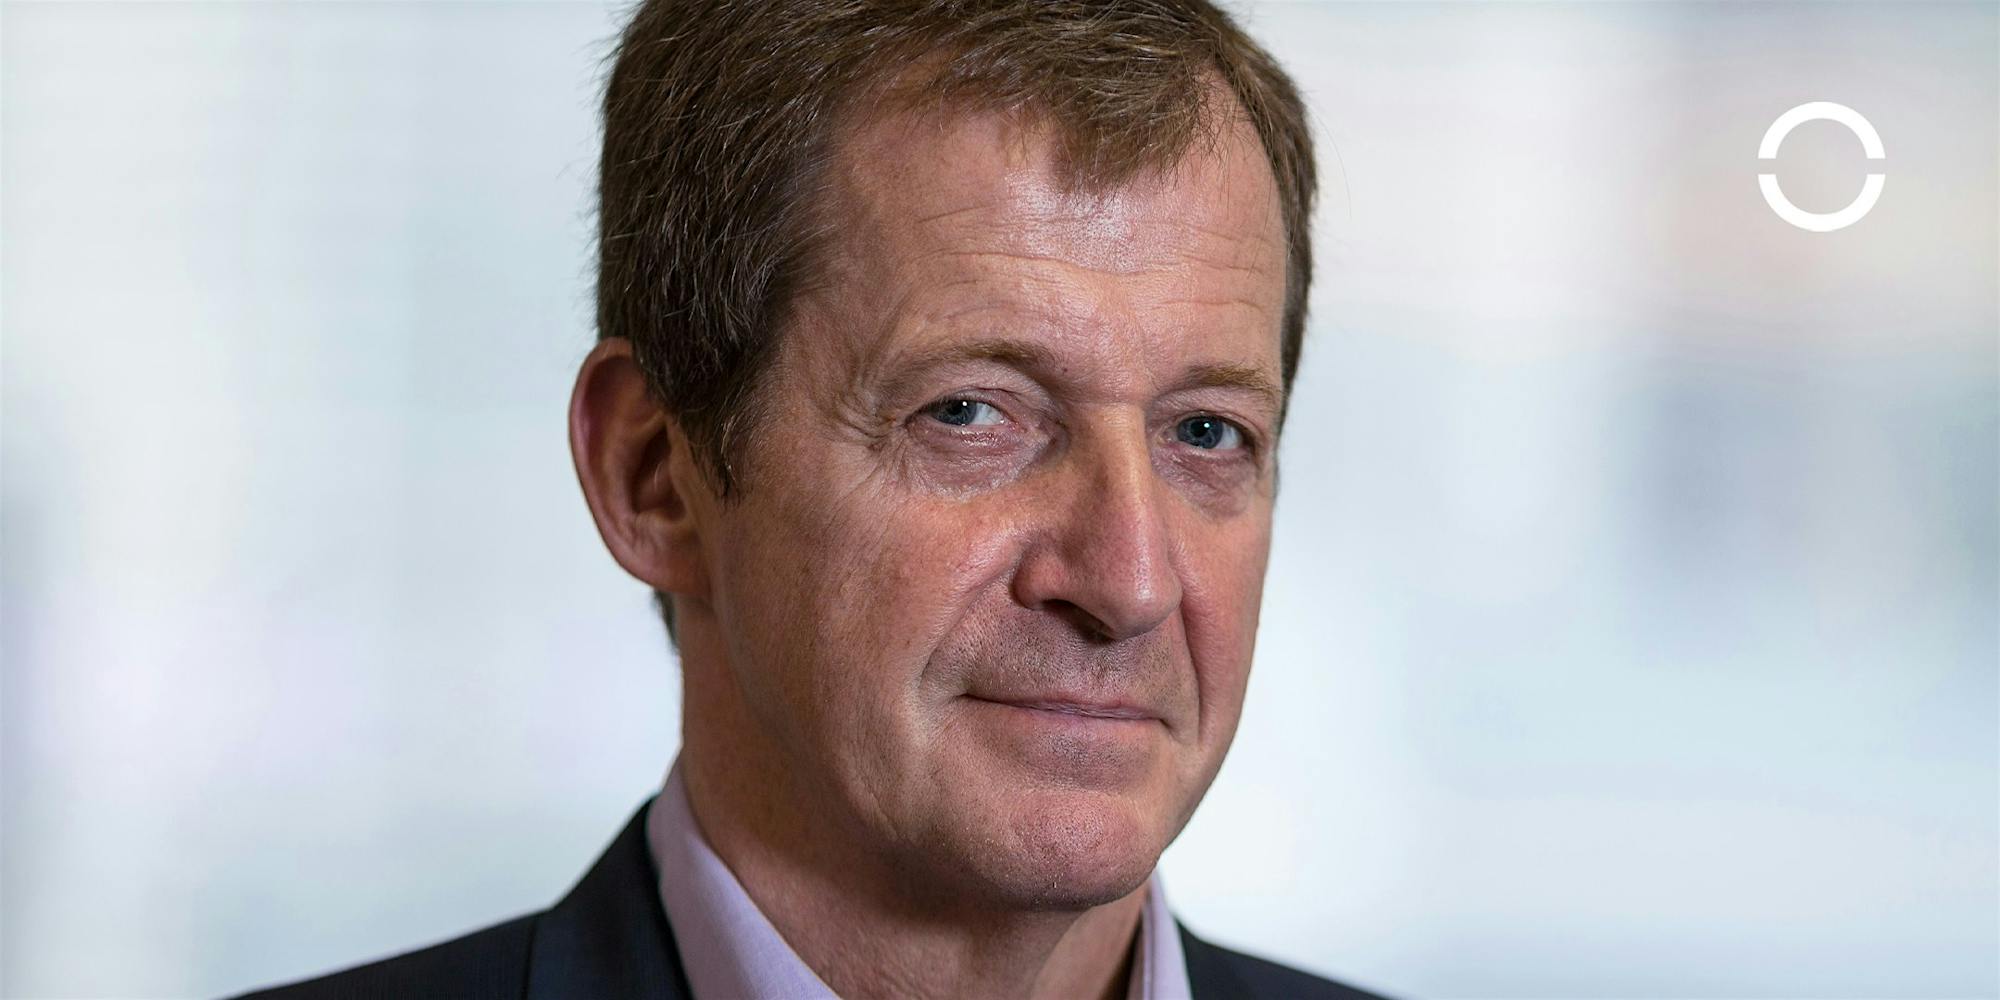 Fora Presents:  Net Zero: Where are we now?  With Alastair Campbell